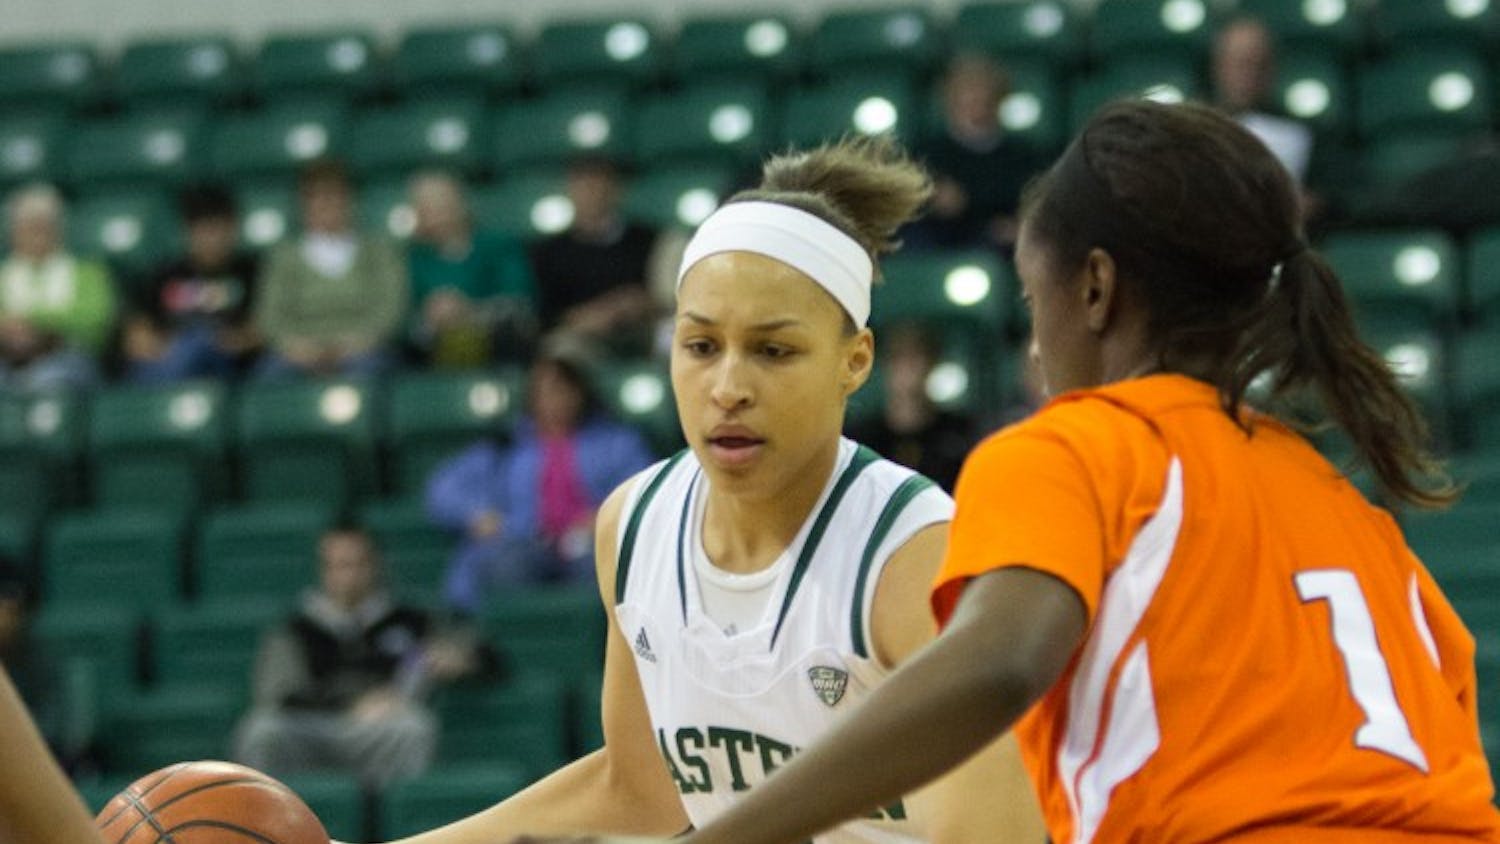 Janay Morton (Brooklyn Park, Minnesota) scored 14 points over 28 minutes of playing time.